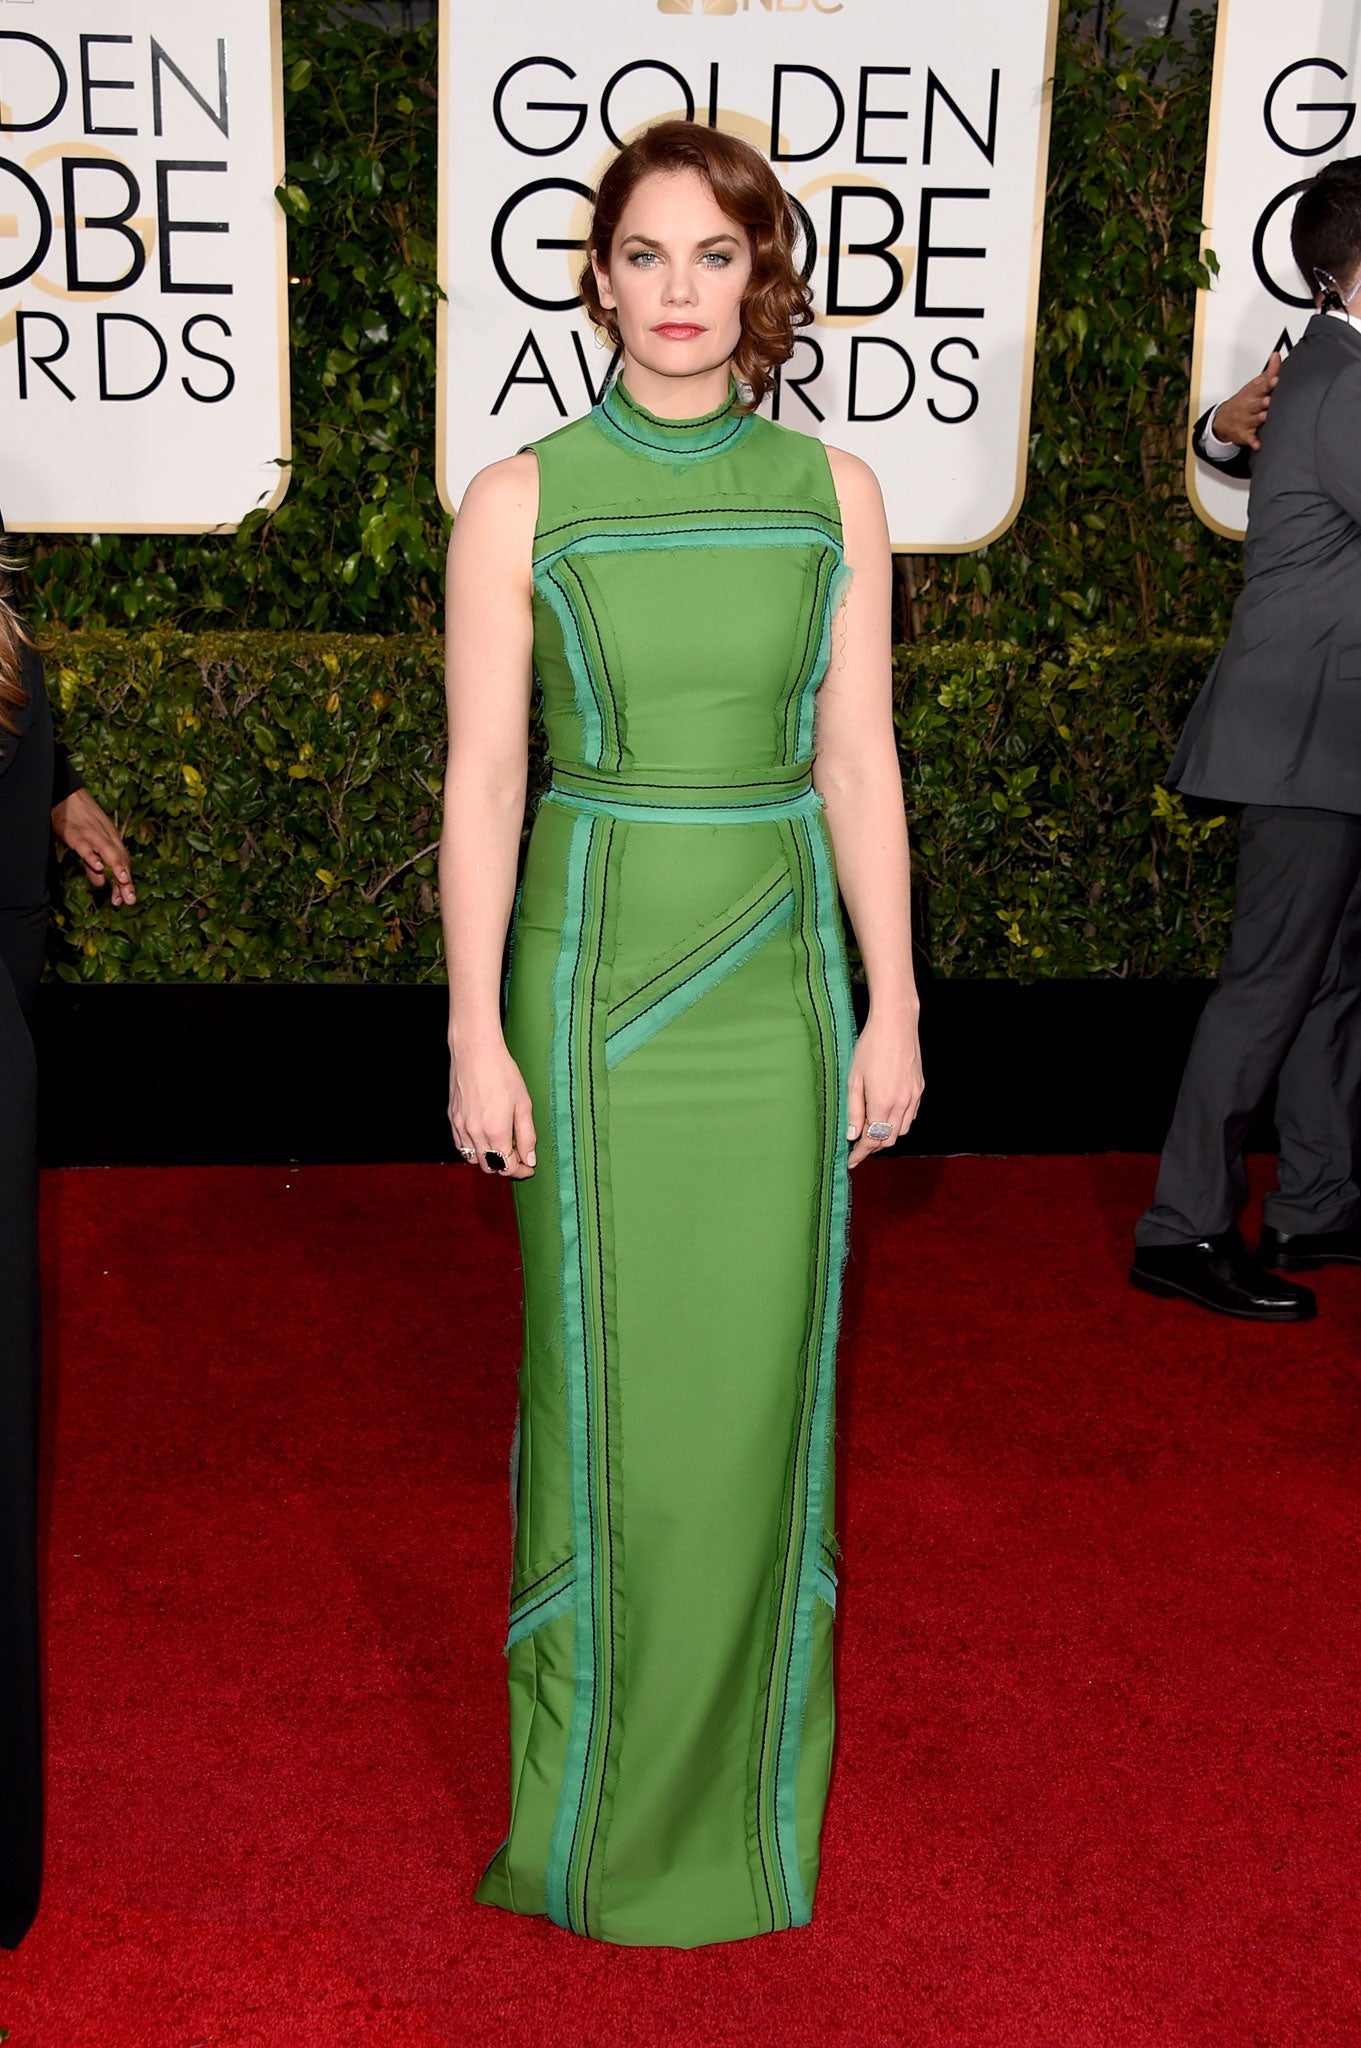 Green goddess: Ruth Wilson attends the Golden Globe Awards in Los Angeles